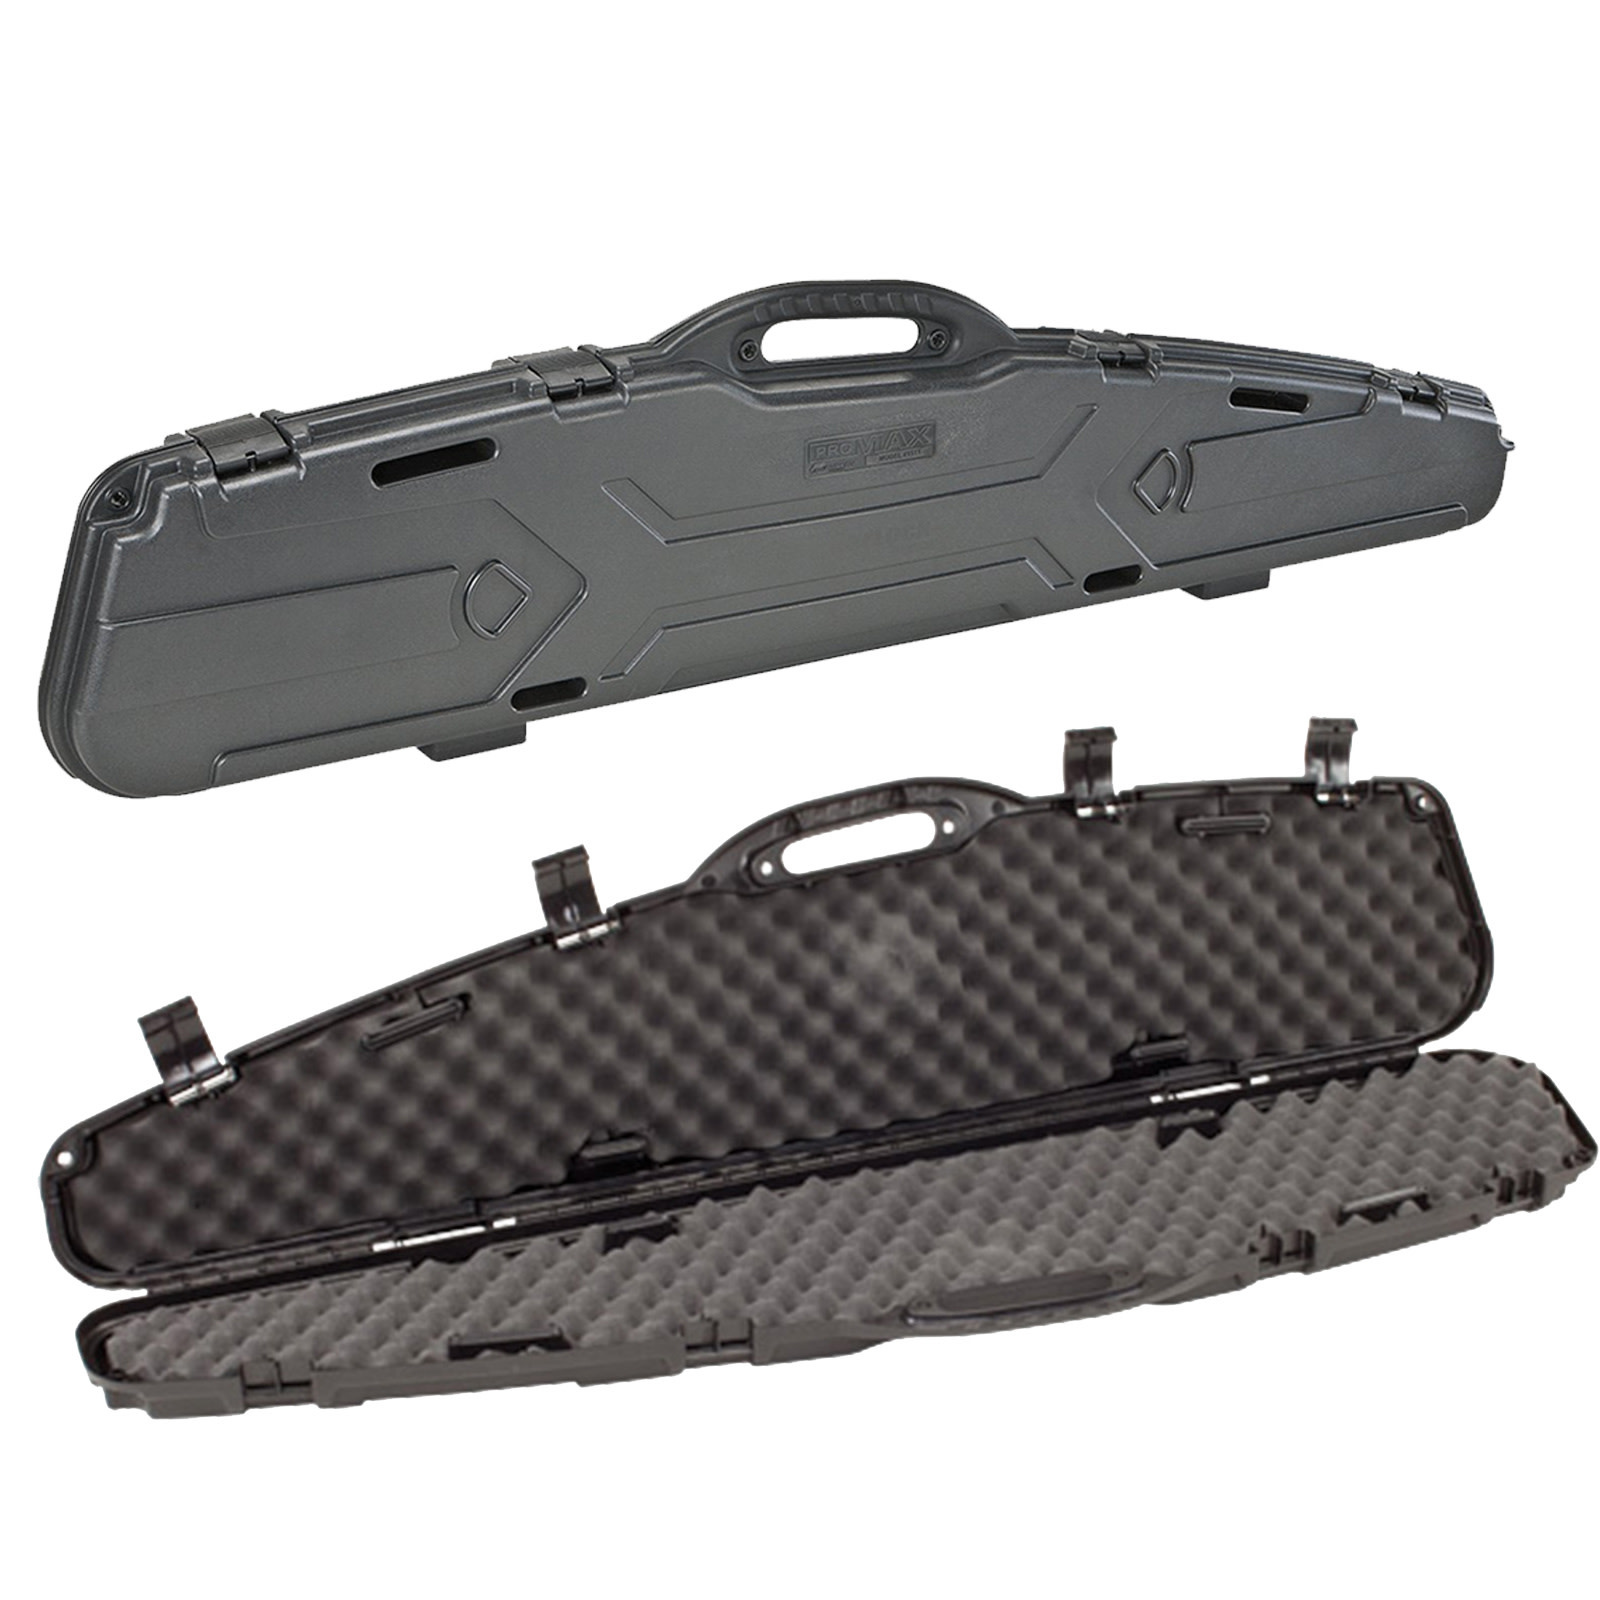 Plano Pro-Max Series Side-by-Side Rifle Case 53 #151200 - Al Flaherty's  Outdoor Store